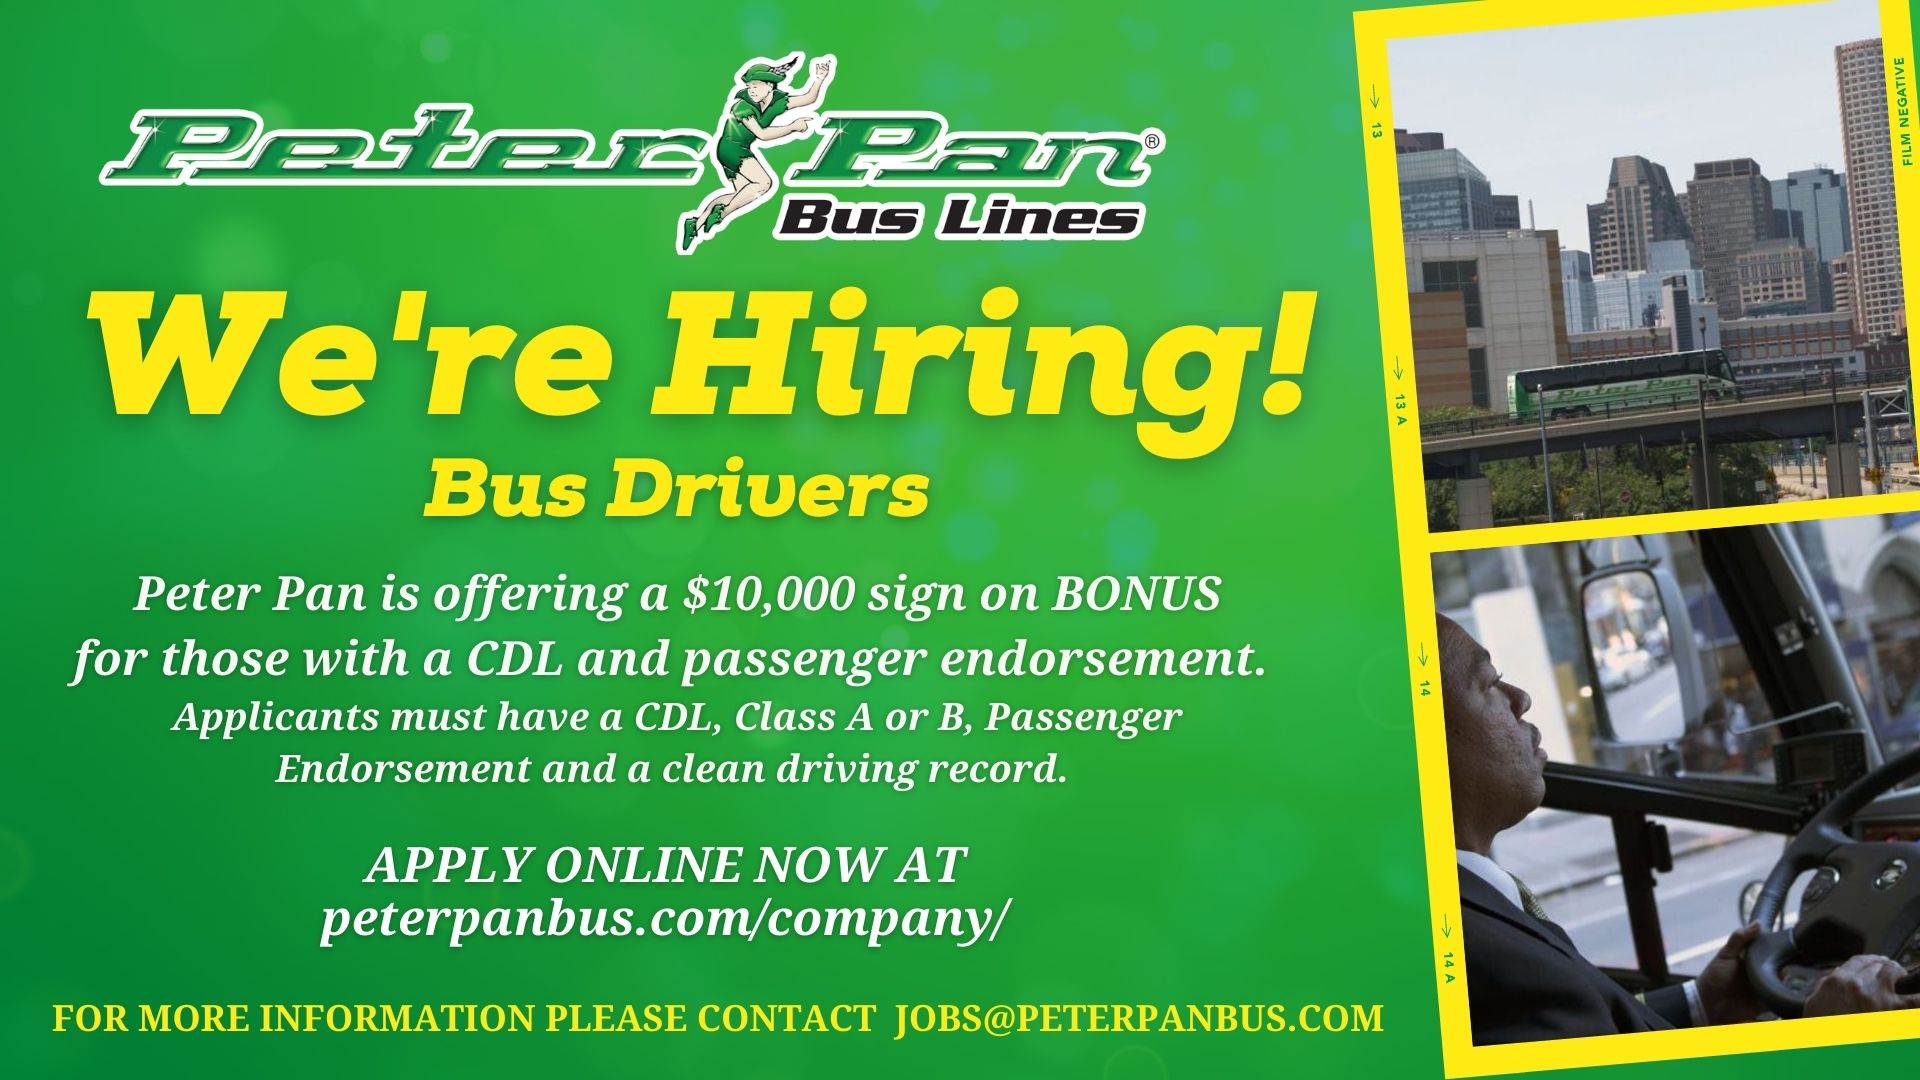 Peter Pan drives bus drivers their way with a $10,000 sign-on bonus and full benefits